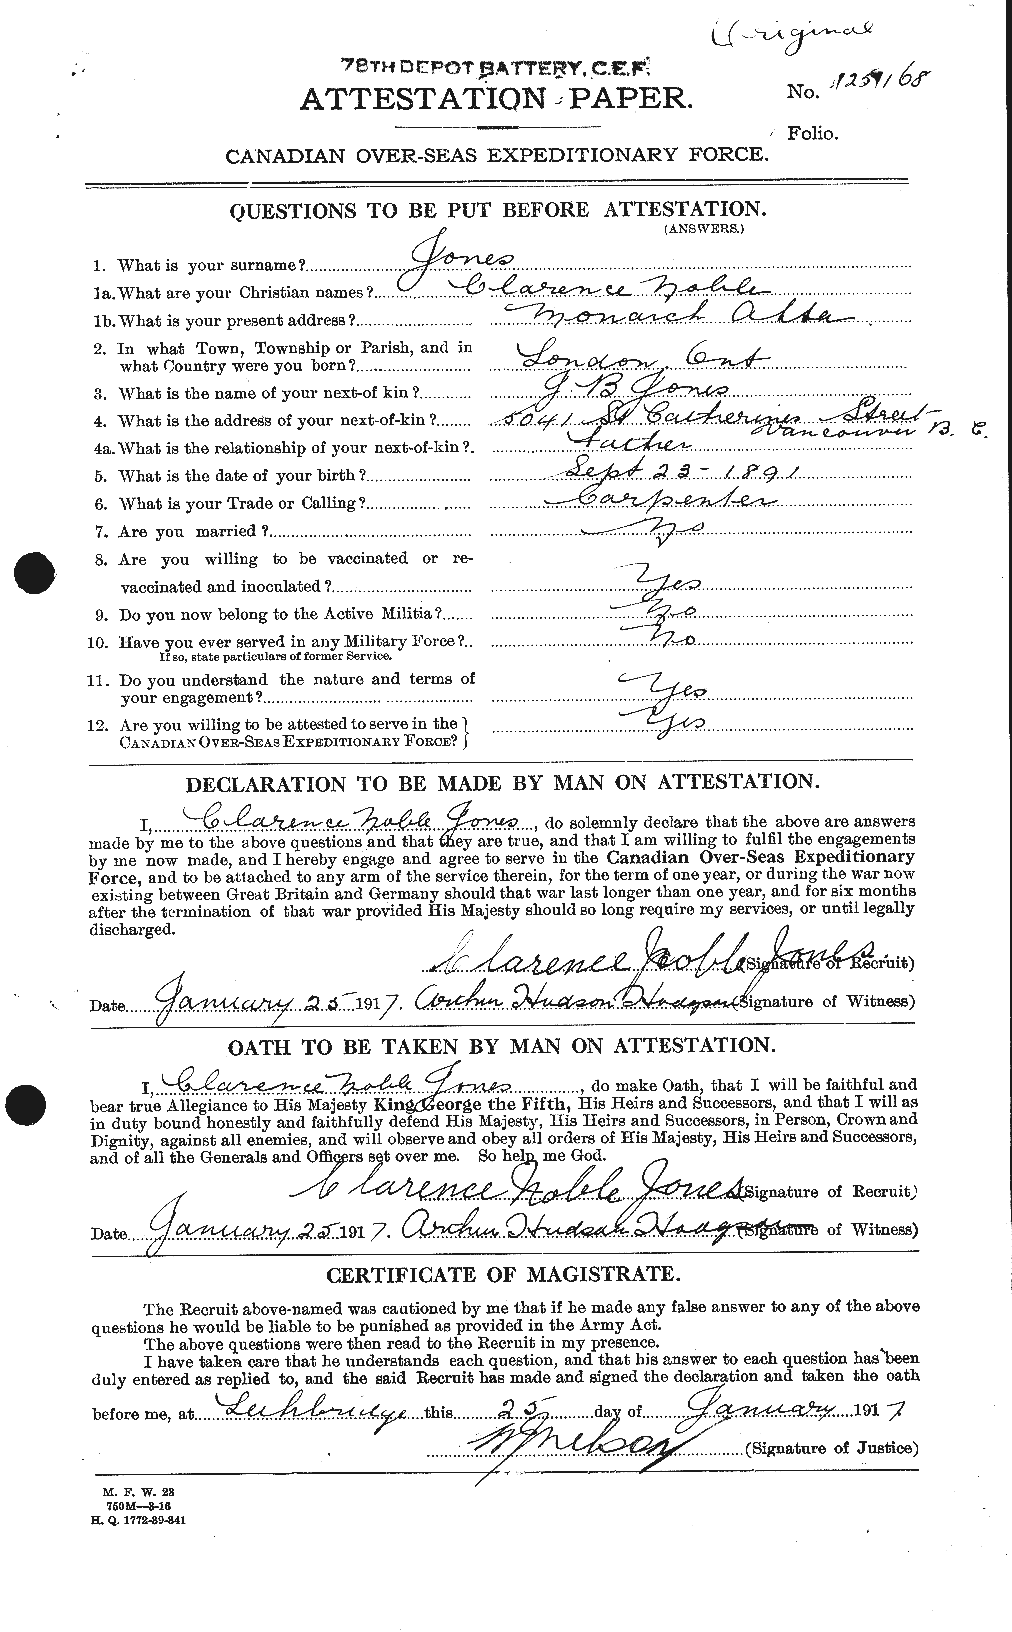 Personnel Records of the First World War - CEF 423895a